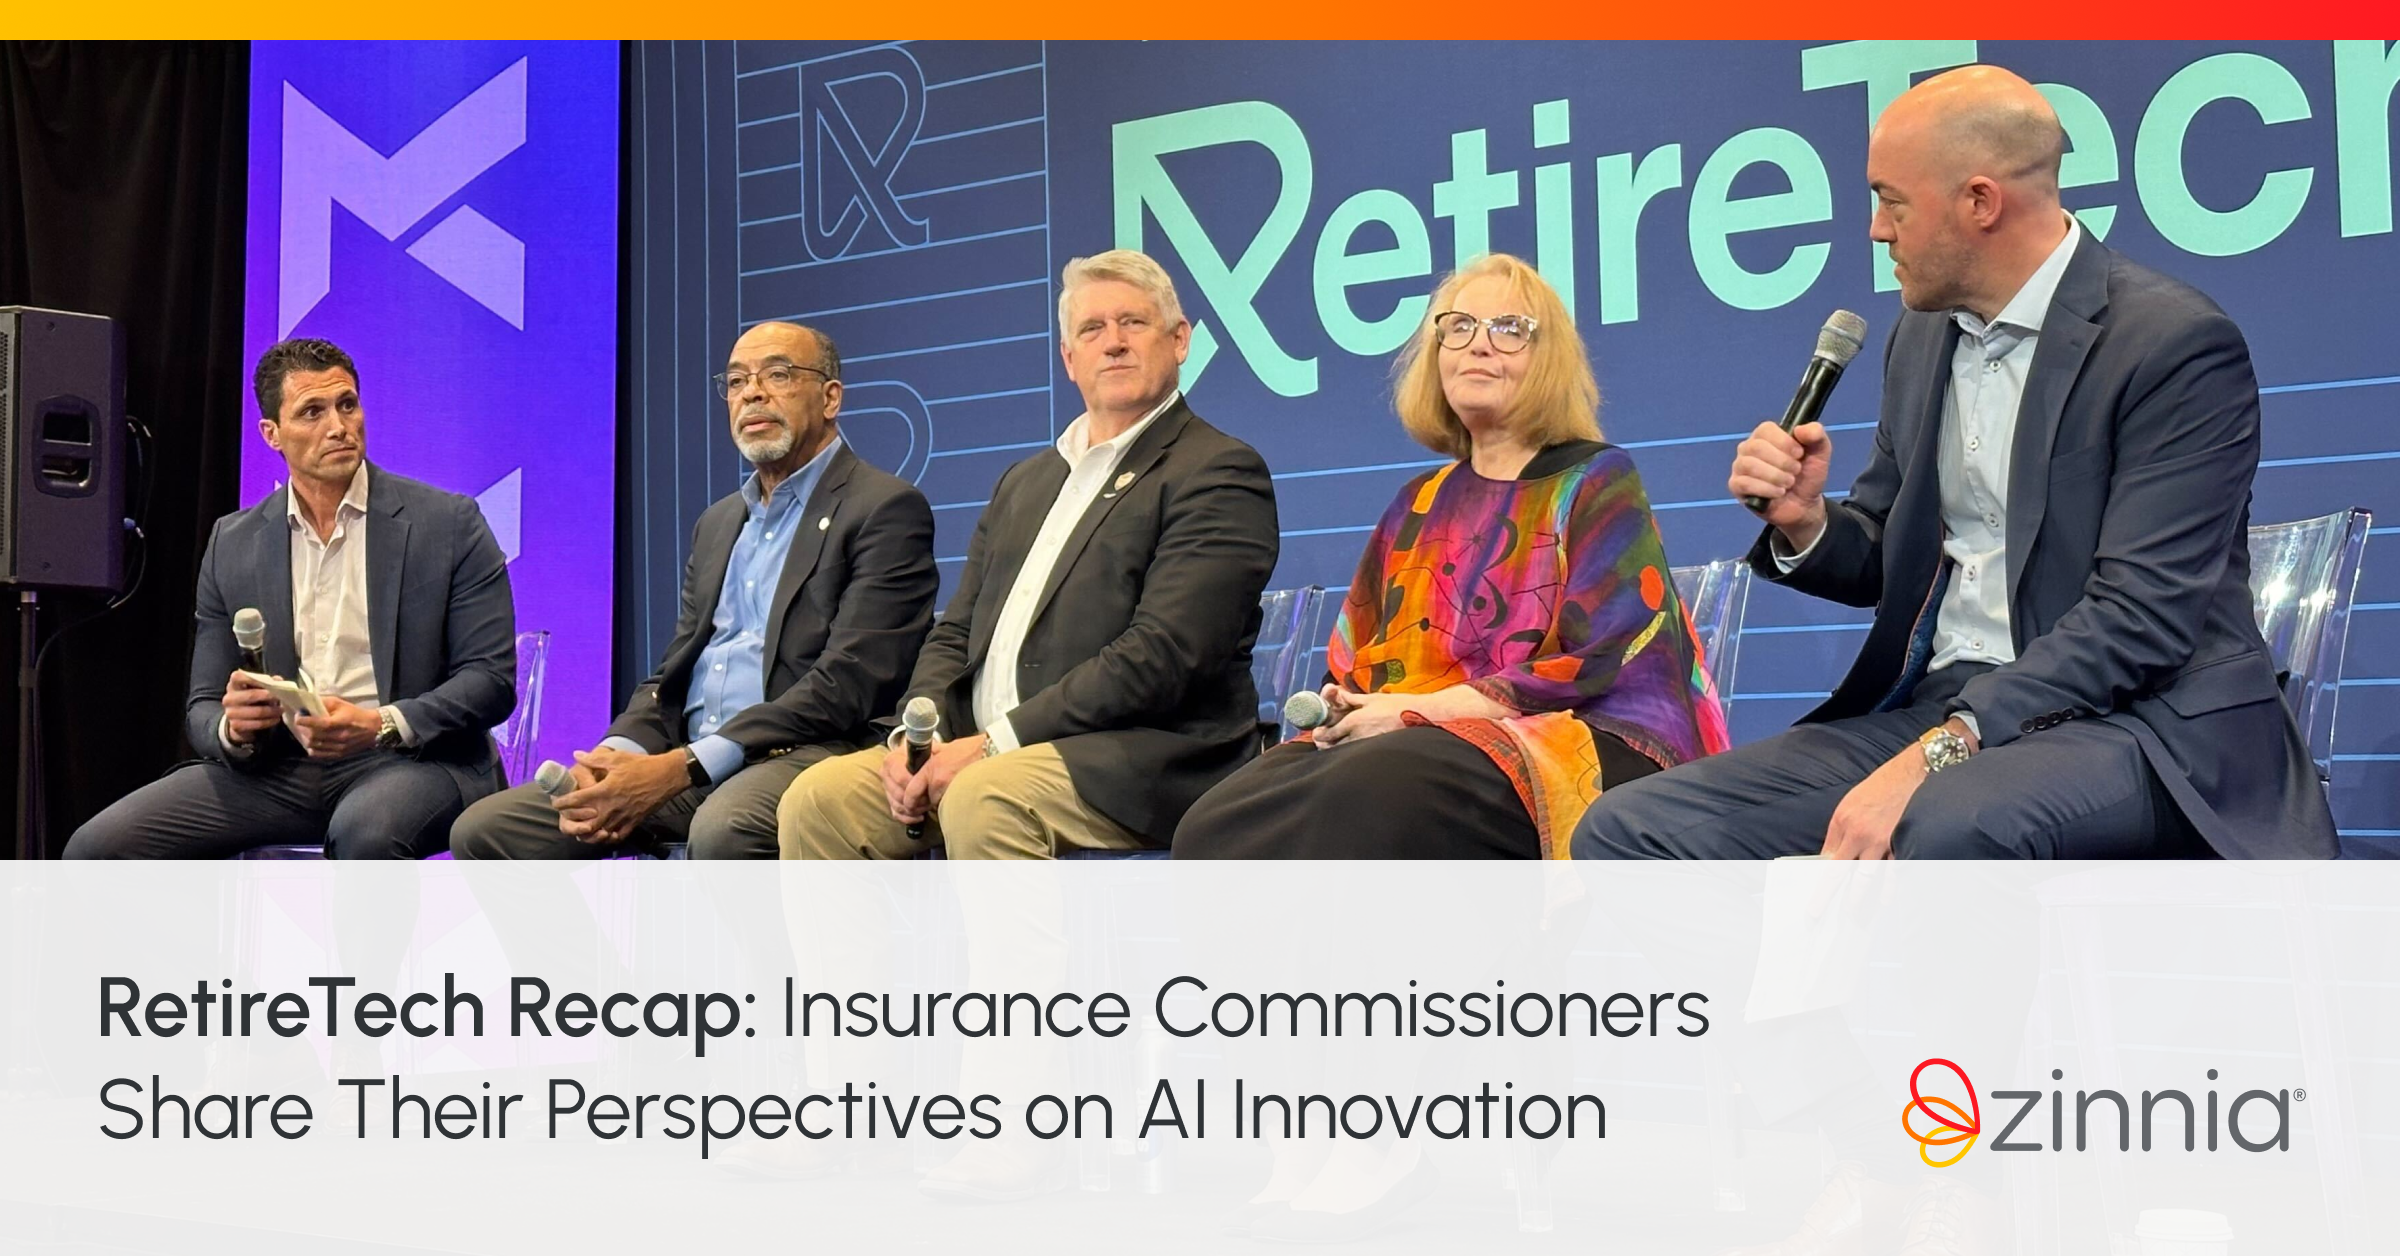 Insurance commissioners share their perspectives on AI innovation